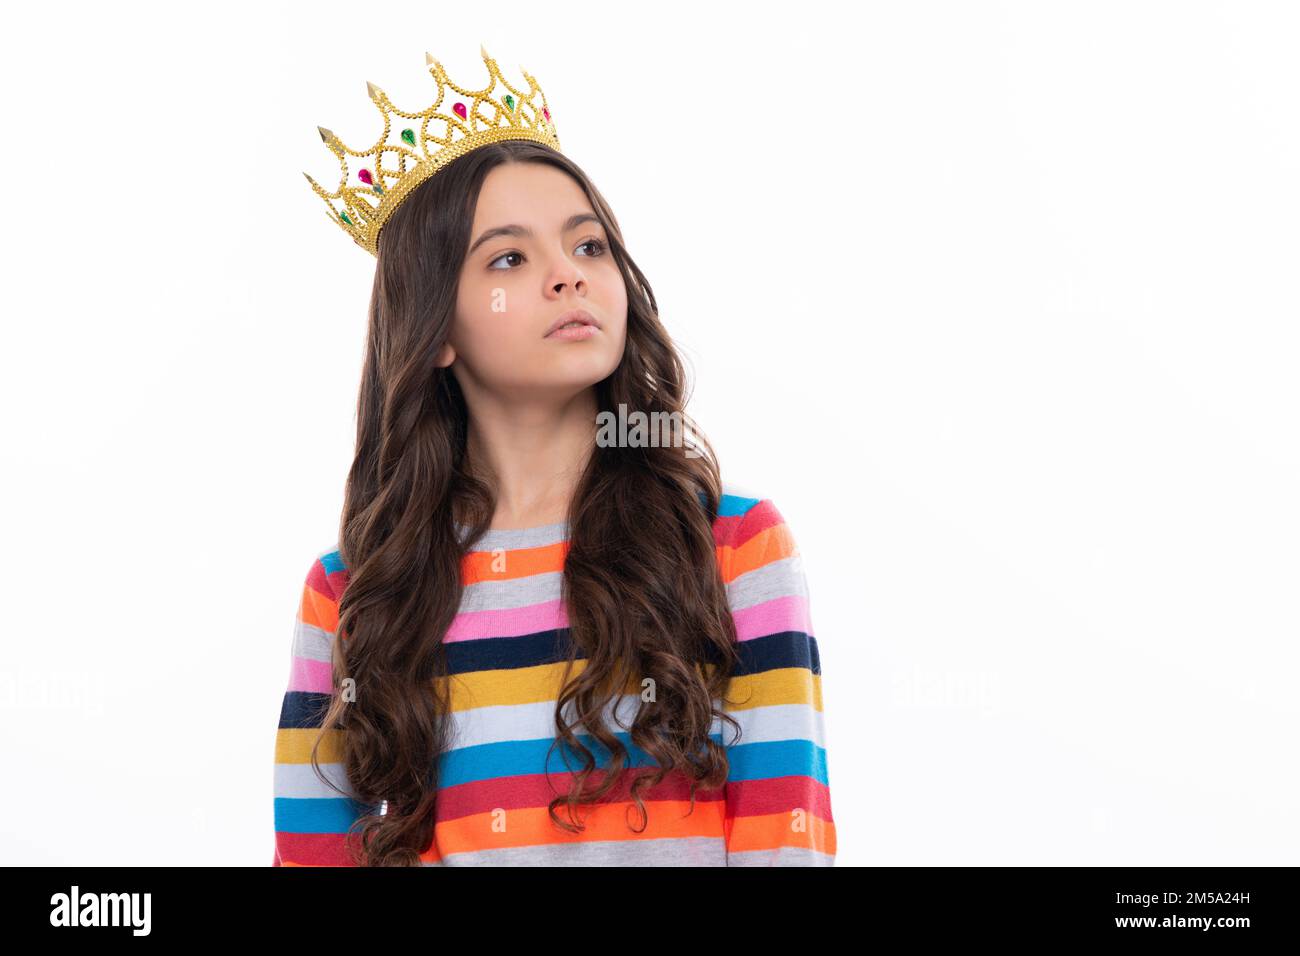 Portrait of ambitious teenage girl with crown, feeling princess, confidence. Child princess crown on isolated studio background. Serious teenager girl Stock Photo